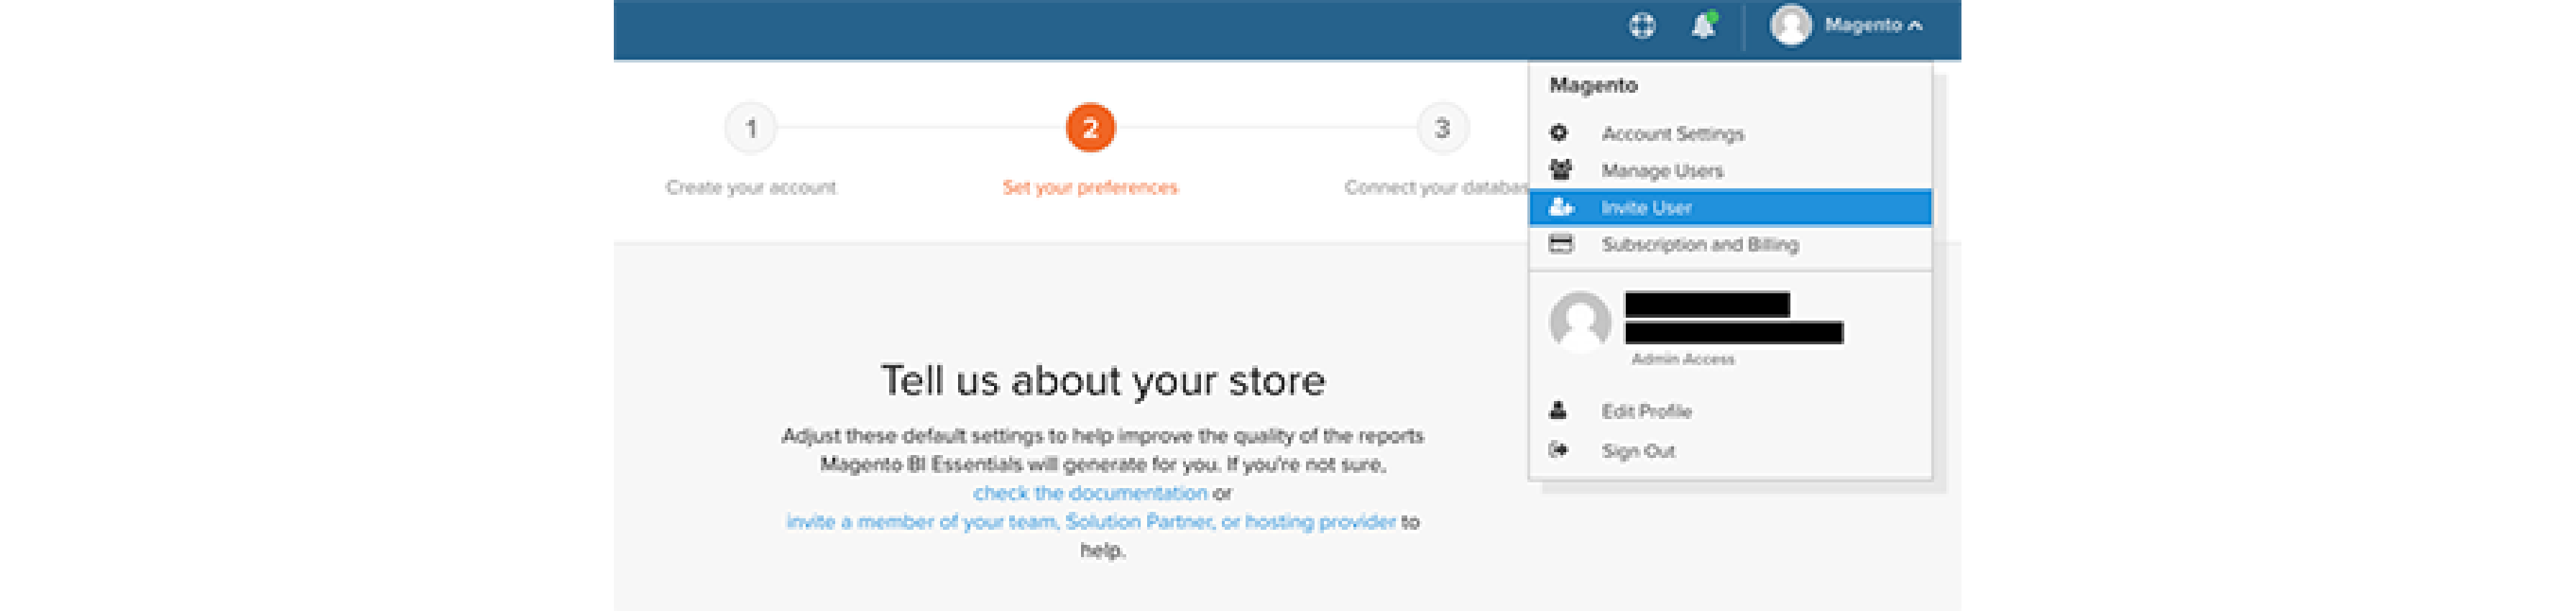 Process of Adding Users to Magento Business Intelligence Account